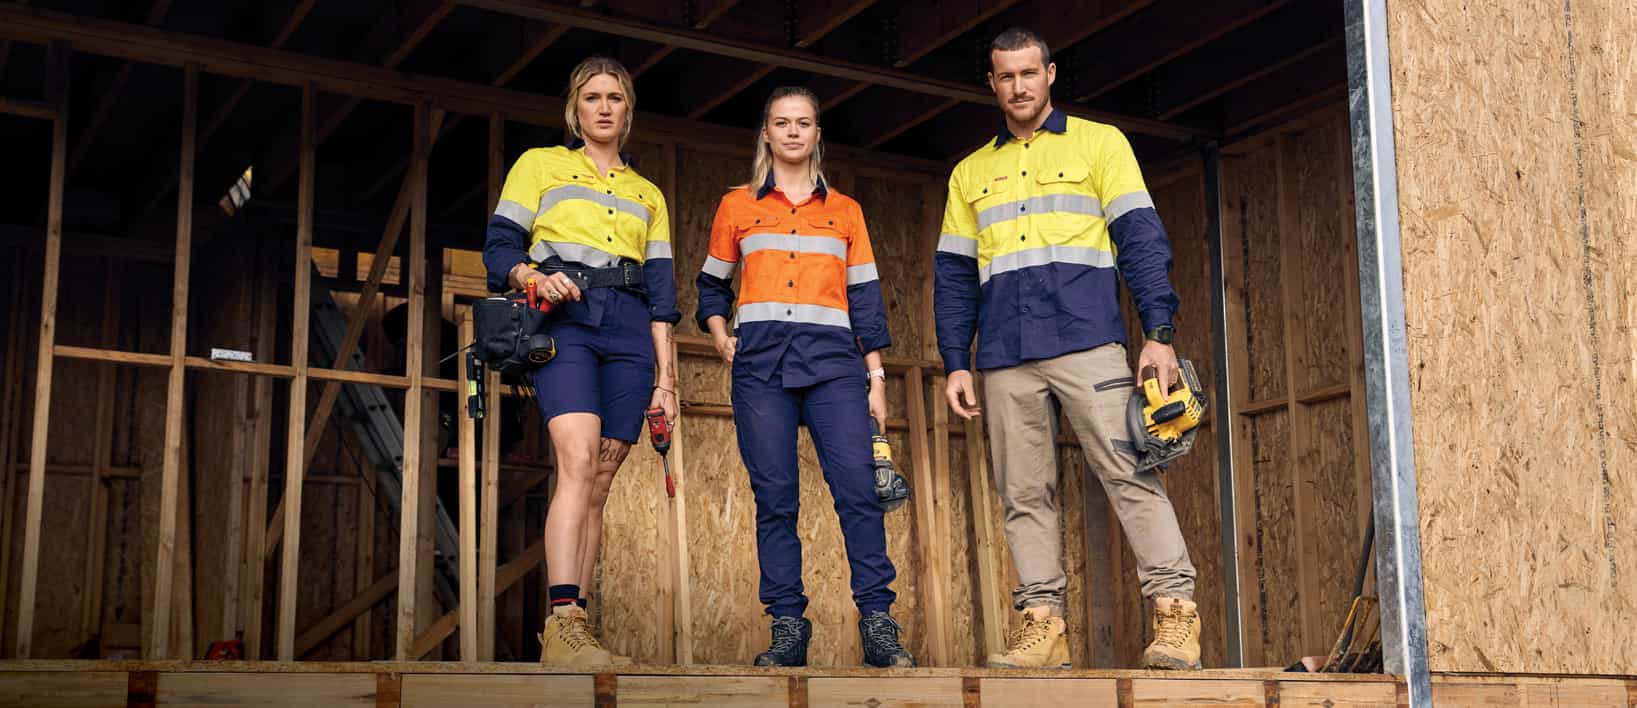 Hard Yakka extra 10% OFF sitewide + free shipping with voucher code. Save on workwear & boots.